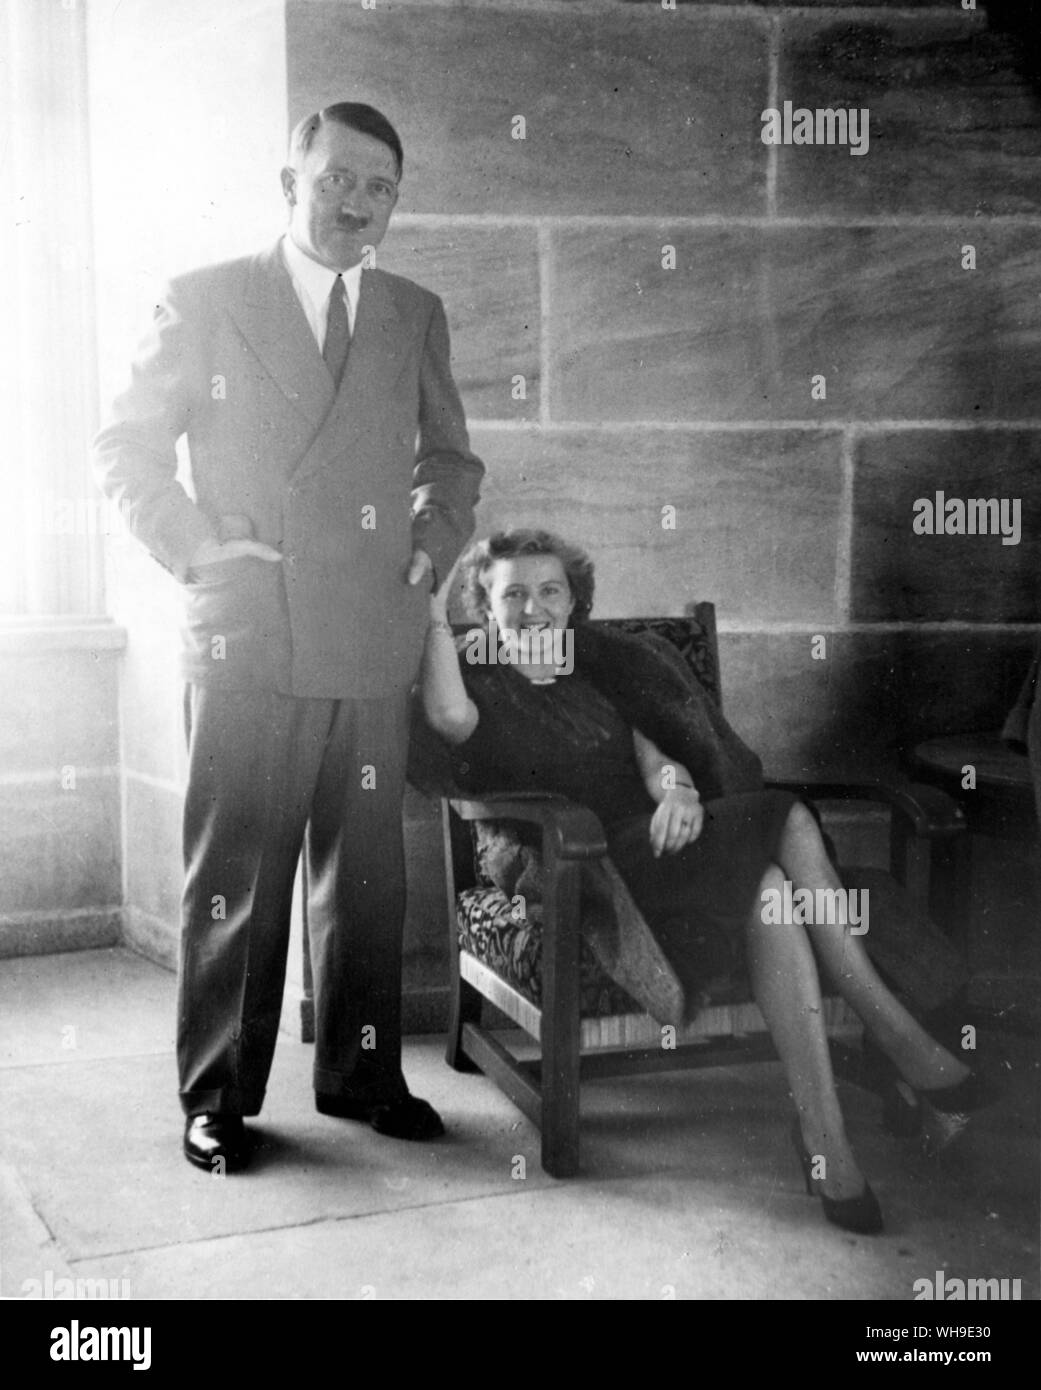 Adolf Hitler and Eva Braun. Photo found by Intelligence Officers investigating Braun's personal belongings when several photo albums were discovered. Hitler (1889-1945), Nazi party leader and German dictator. Stock Photo